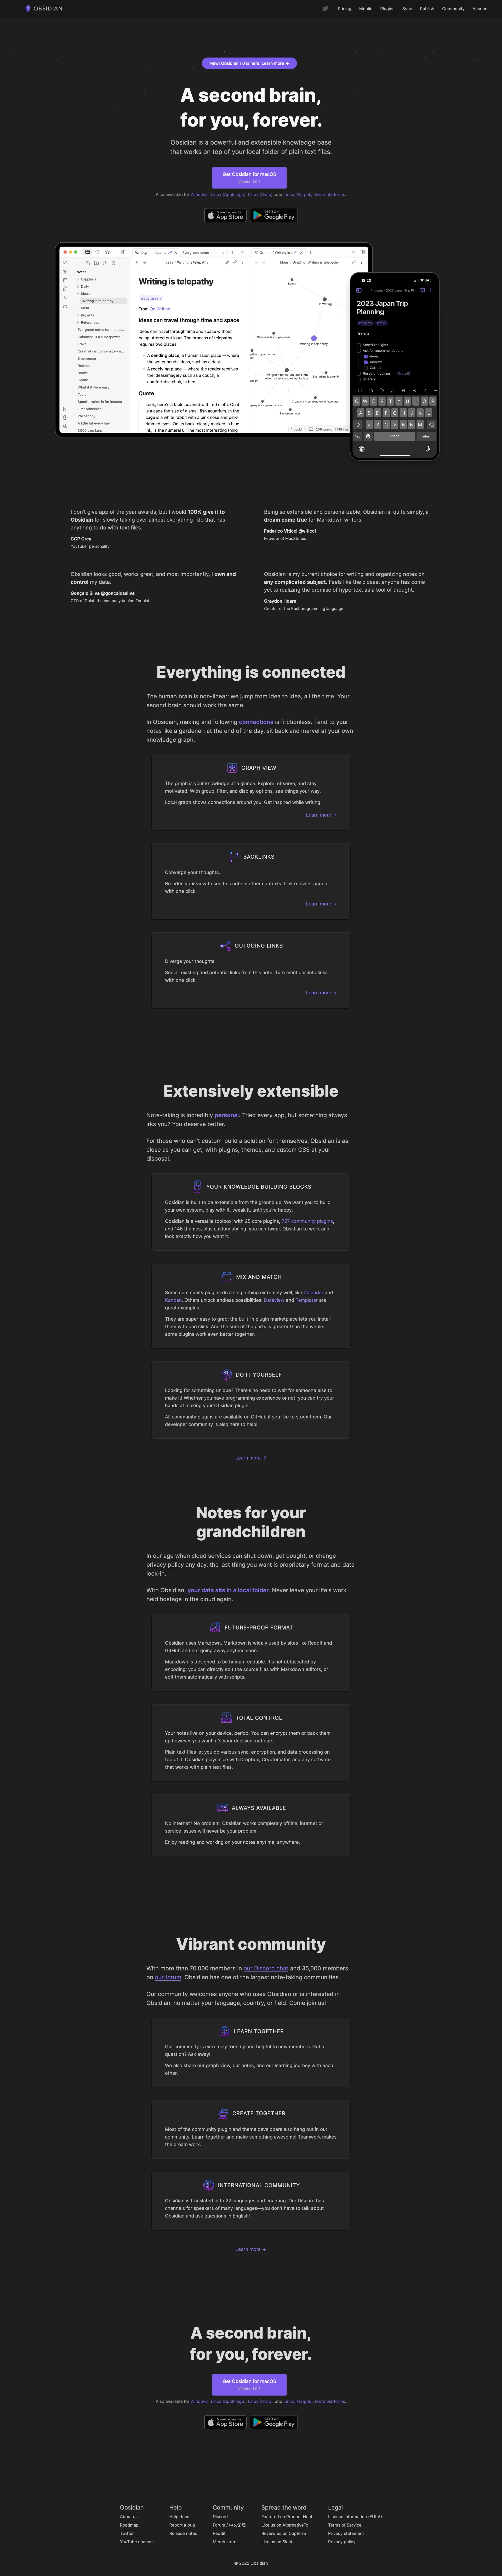 Obsidian Landing Page Example: A second brain, for you, forever. Obsidian is a powerful and extensible knowledge base that works on top of your local folder of plain text files.